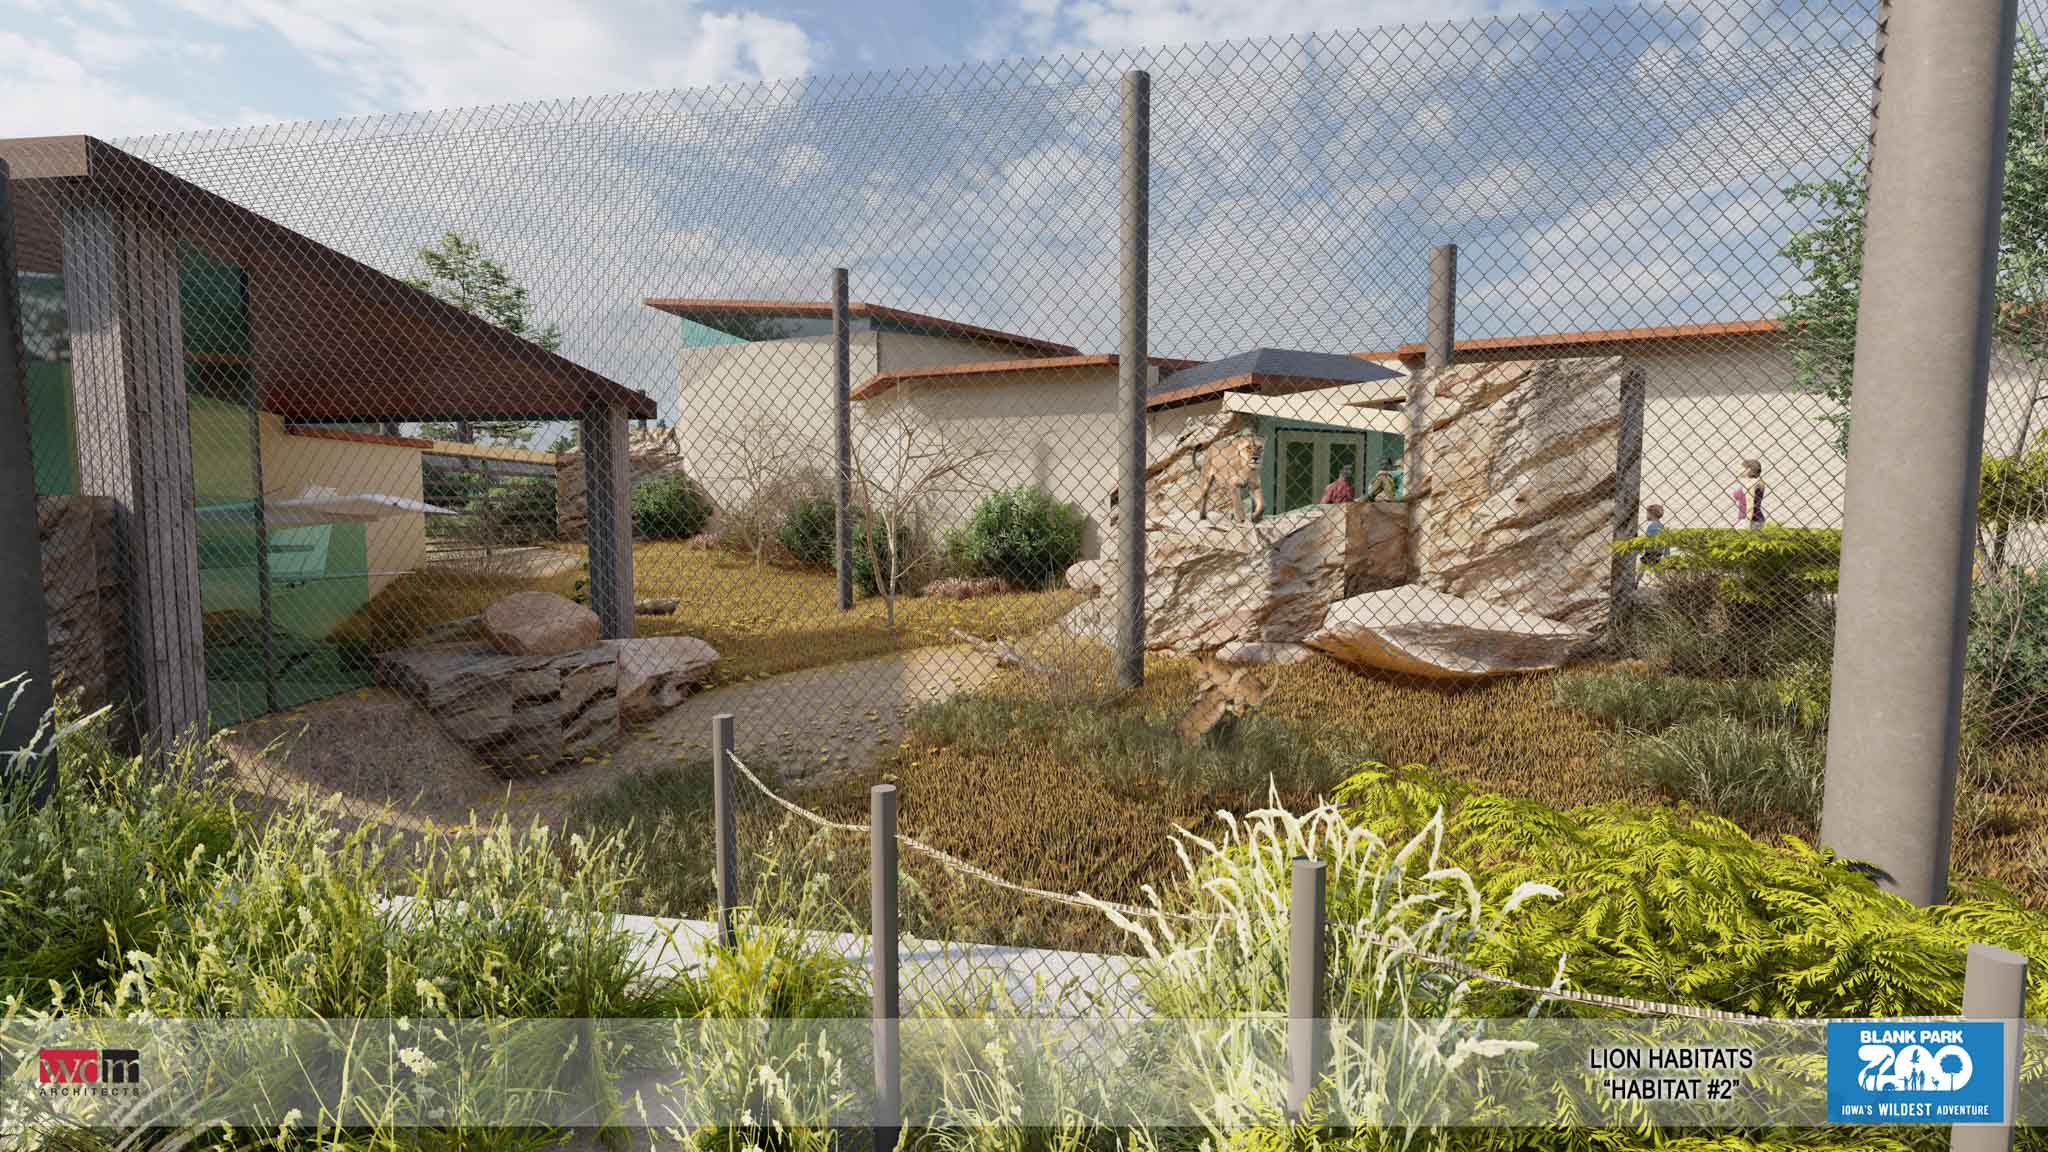 Rendering of lion habitat with rocks and buildings for viewing